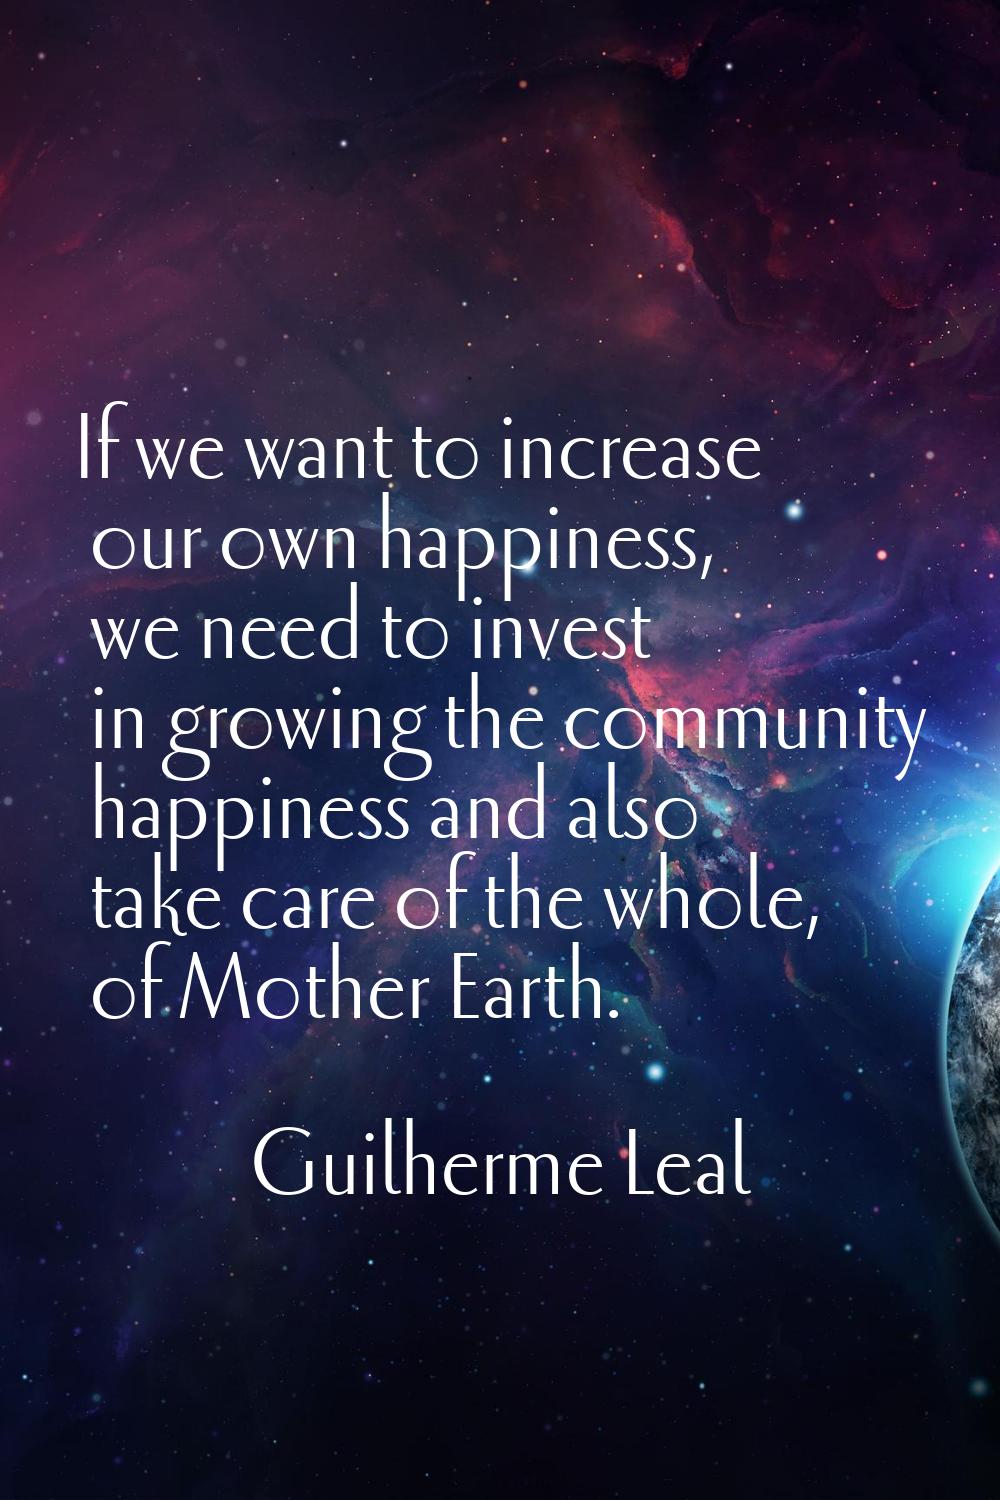 If we want to increase our own happiness, we need to invest in growing the community happiness and 